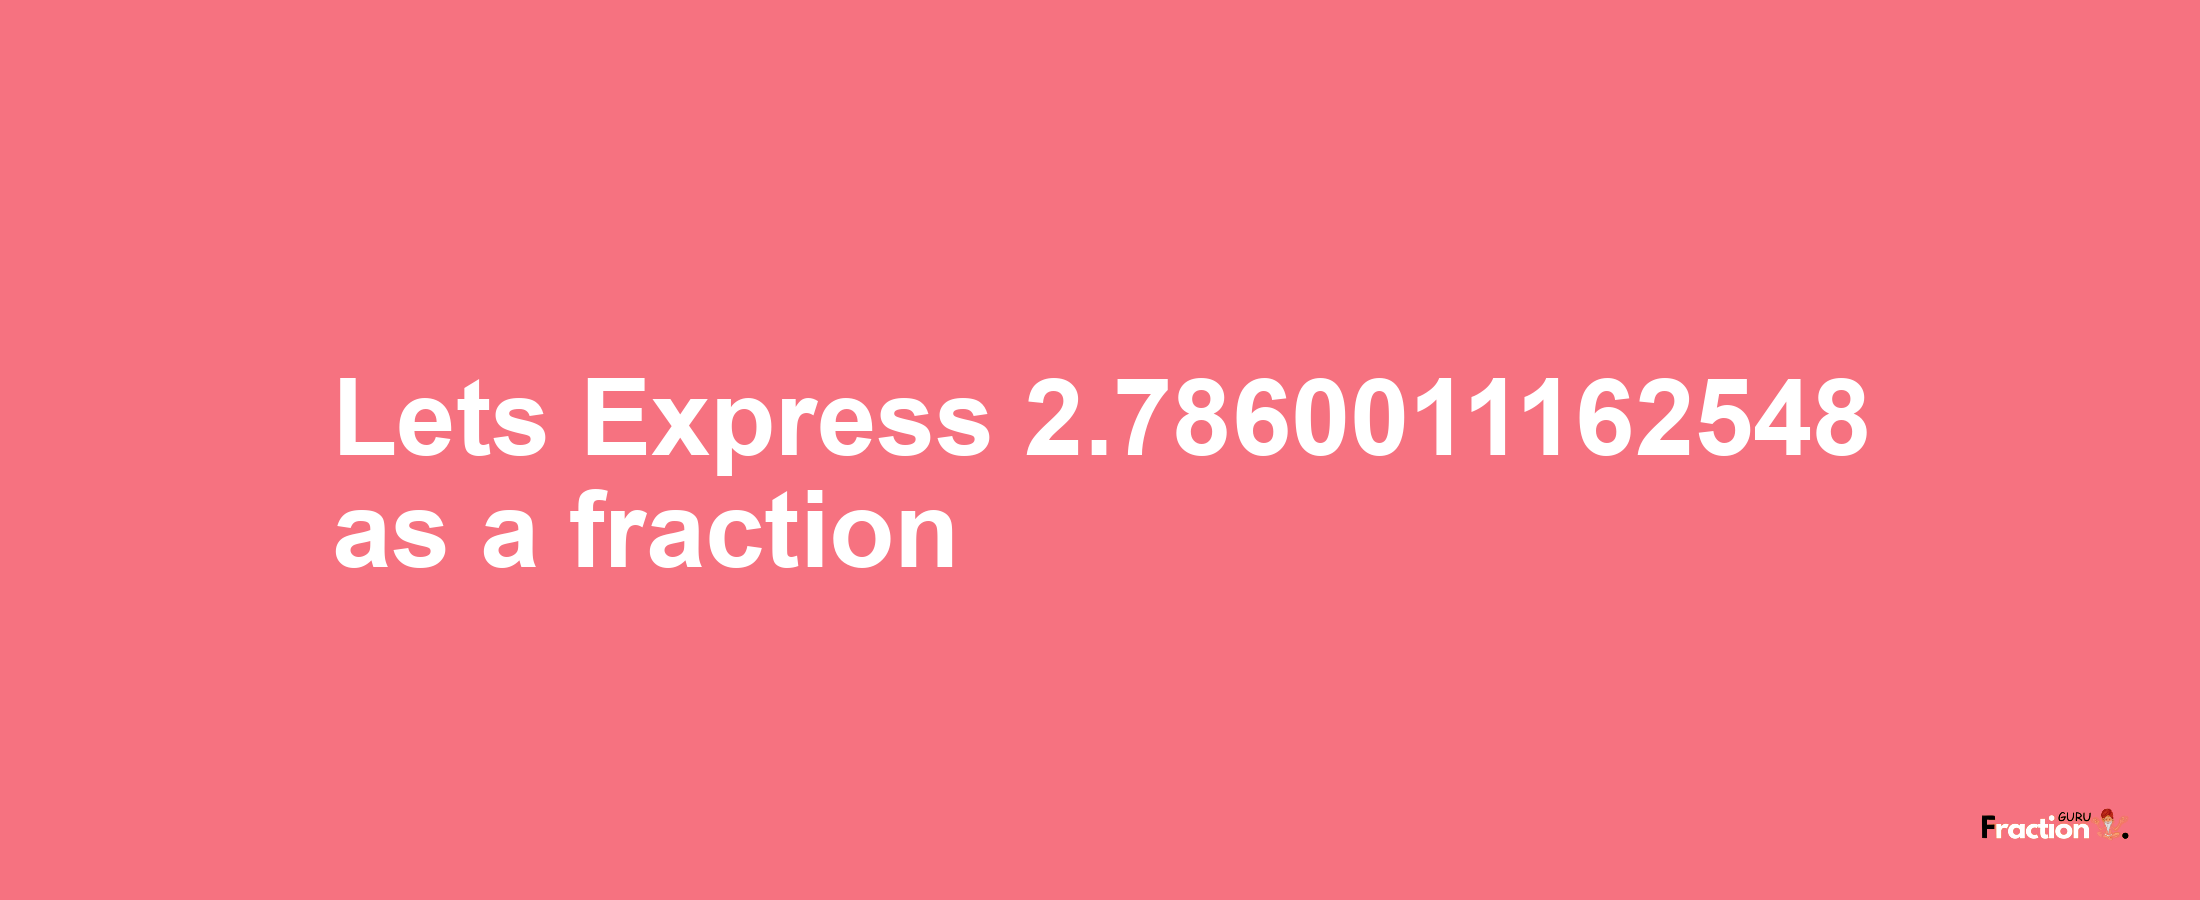 Lets Express 2.7860011162548 as afraction